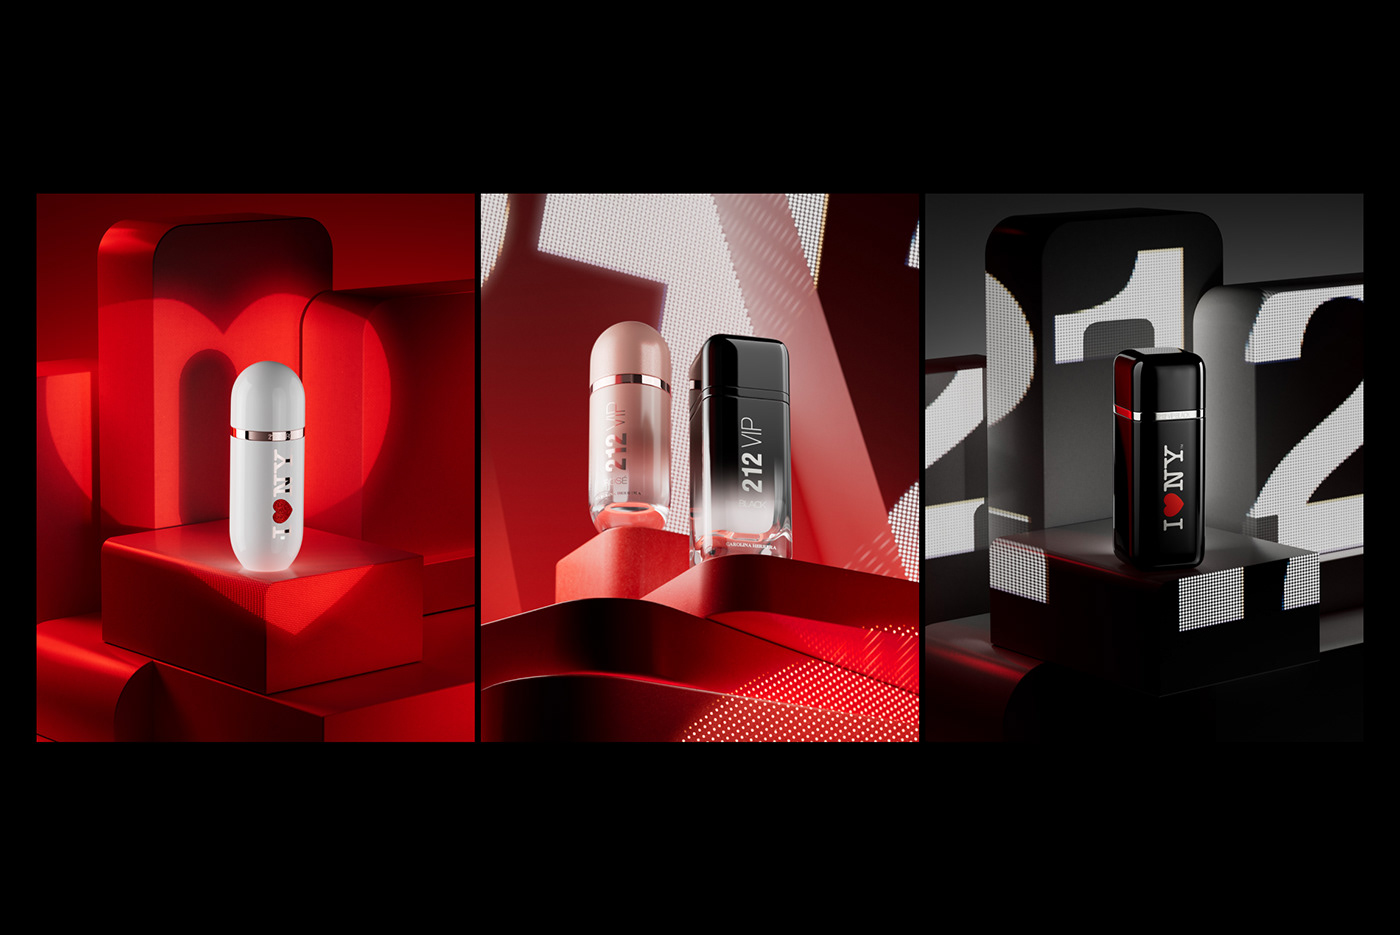 Fragrance perfume Packaging product design  Project Management Retail marketing  